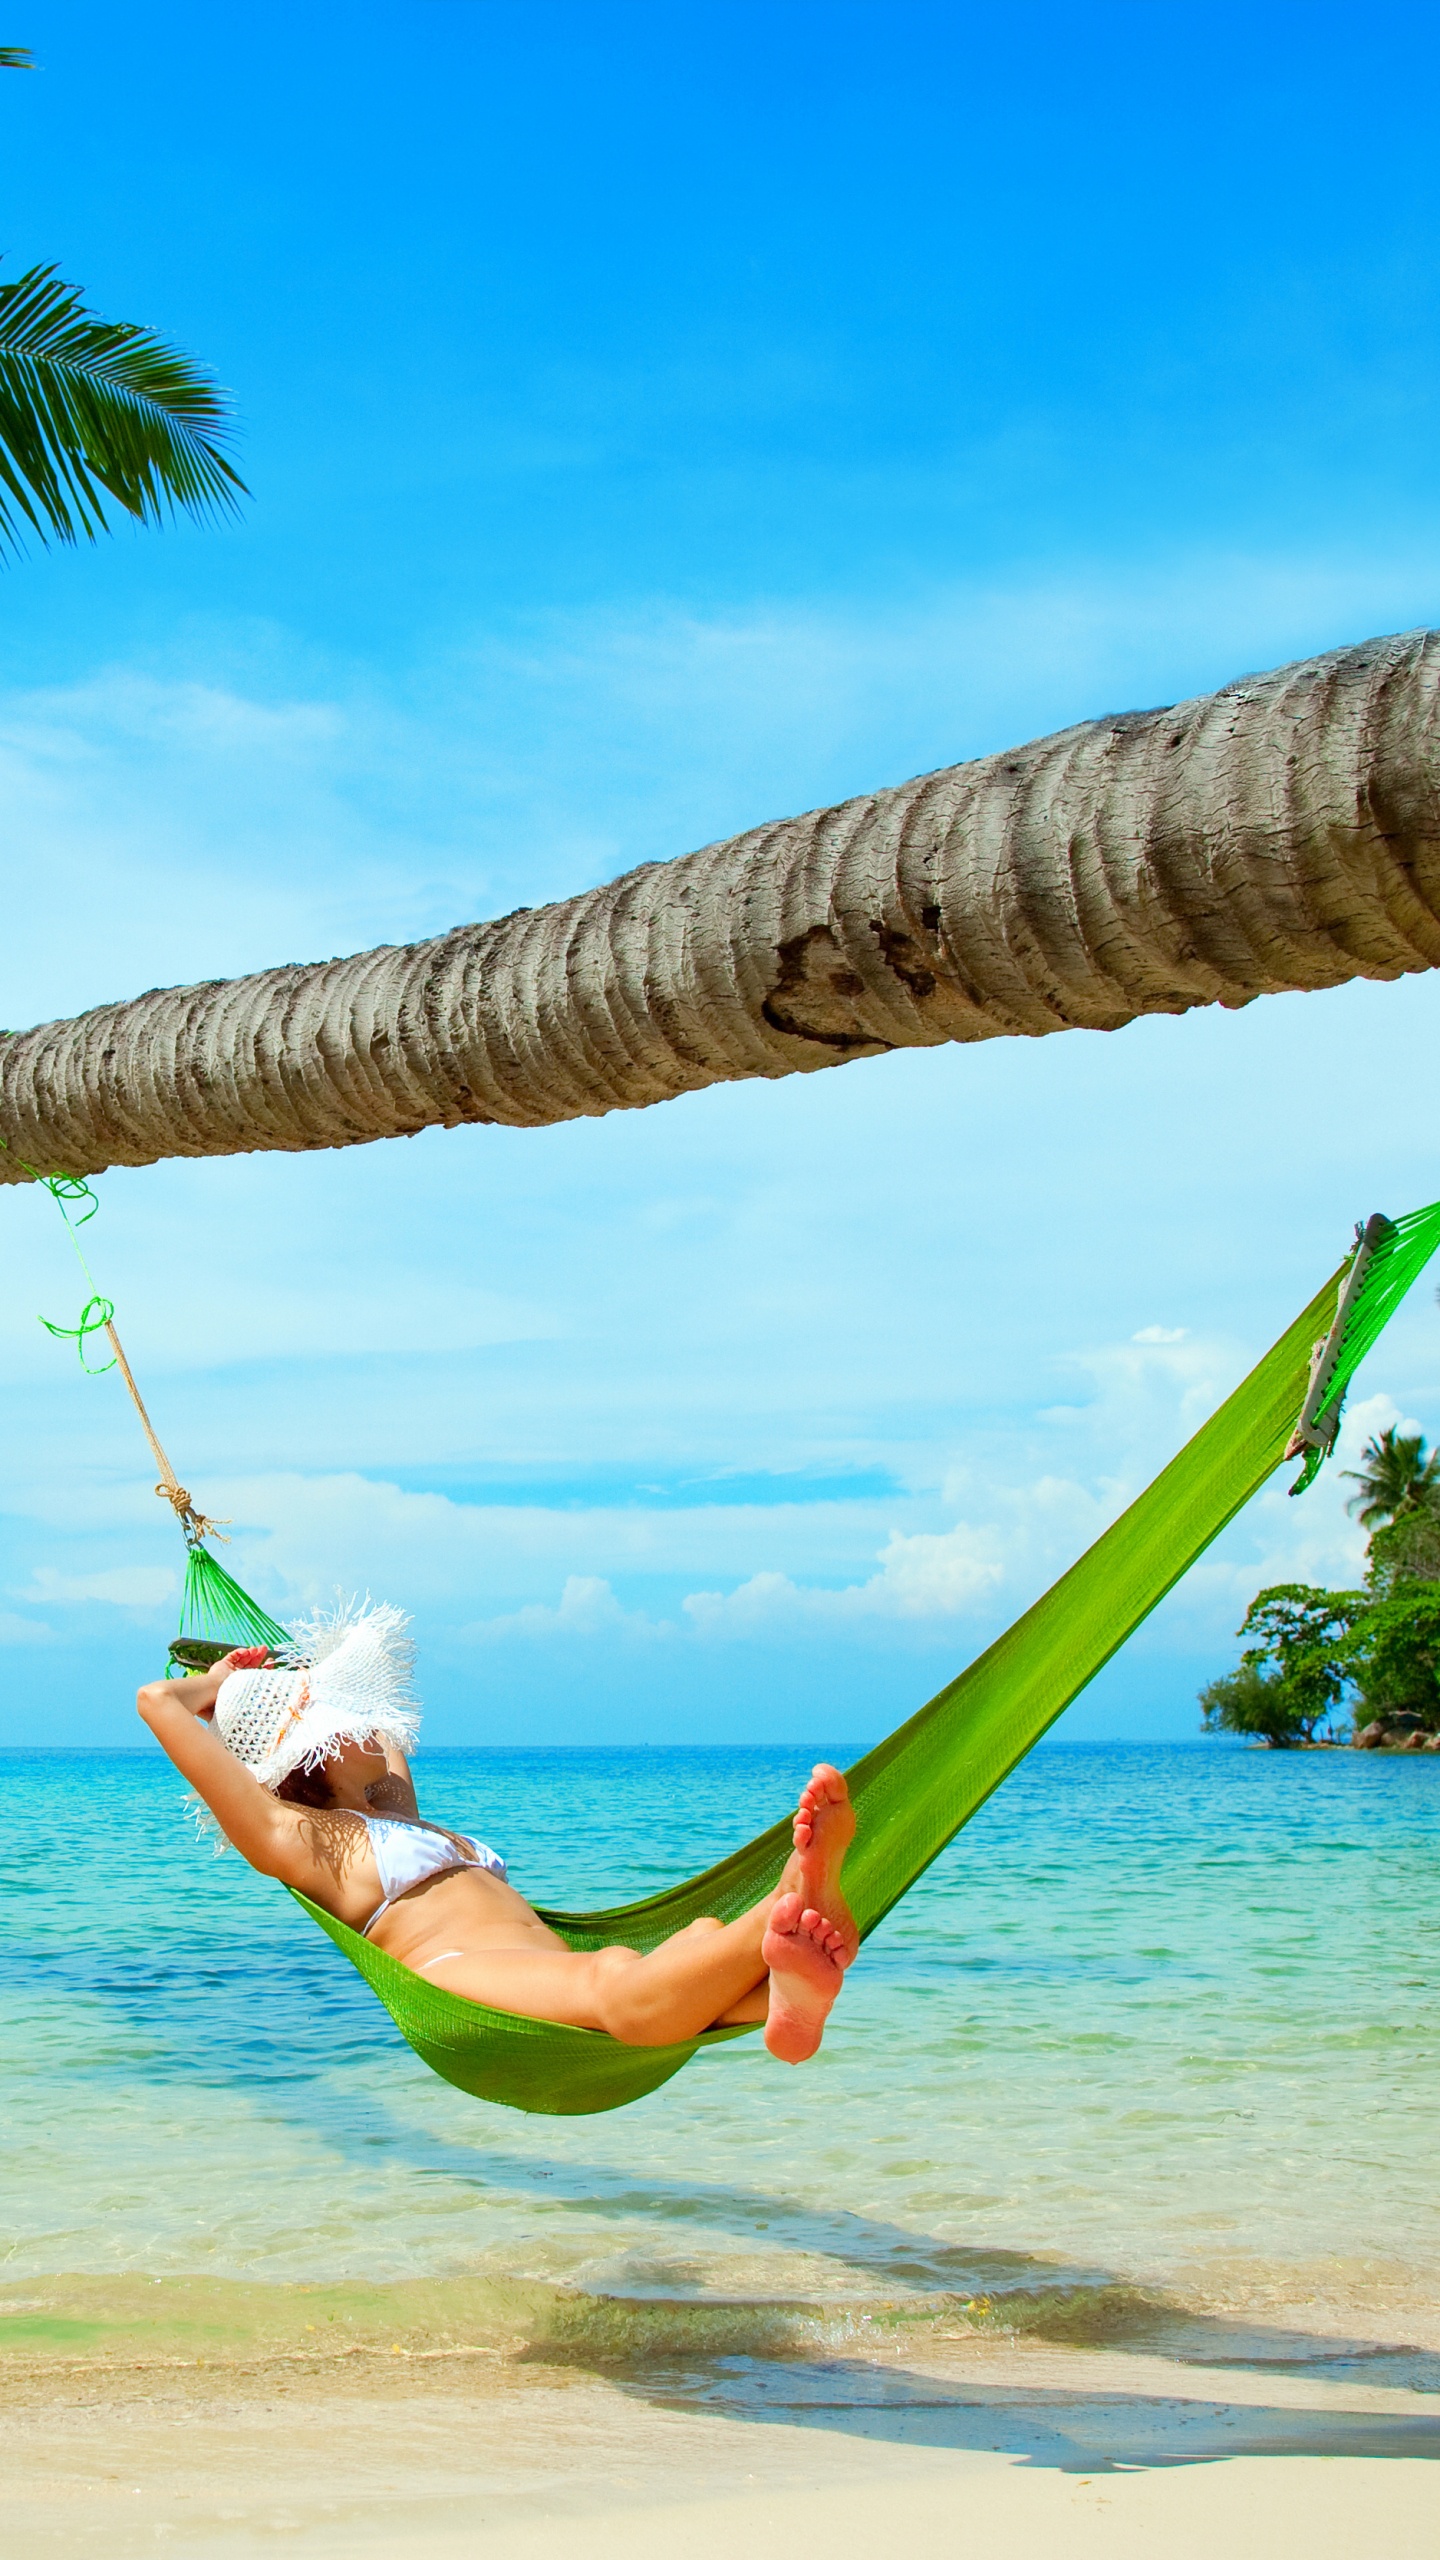 Woman in White Shirt and Green Shorts Lying on Hammock Under Coconut Tree During Daytime. Wallpaper in 1440x2560 Resolution